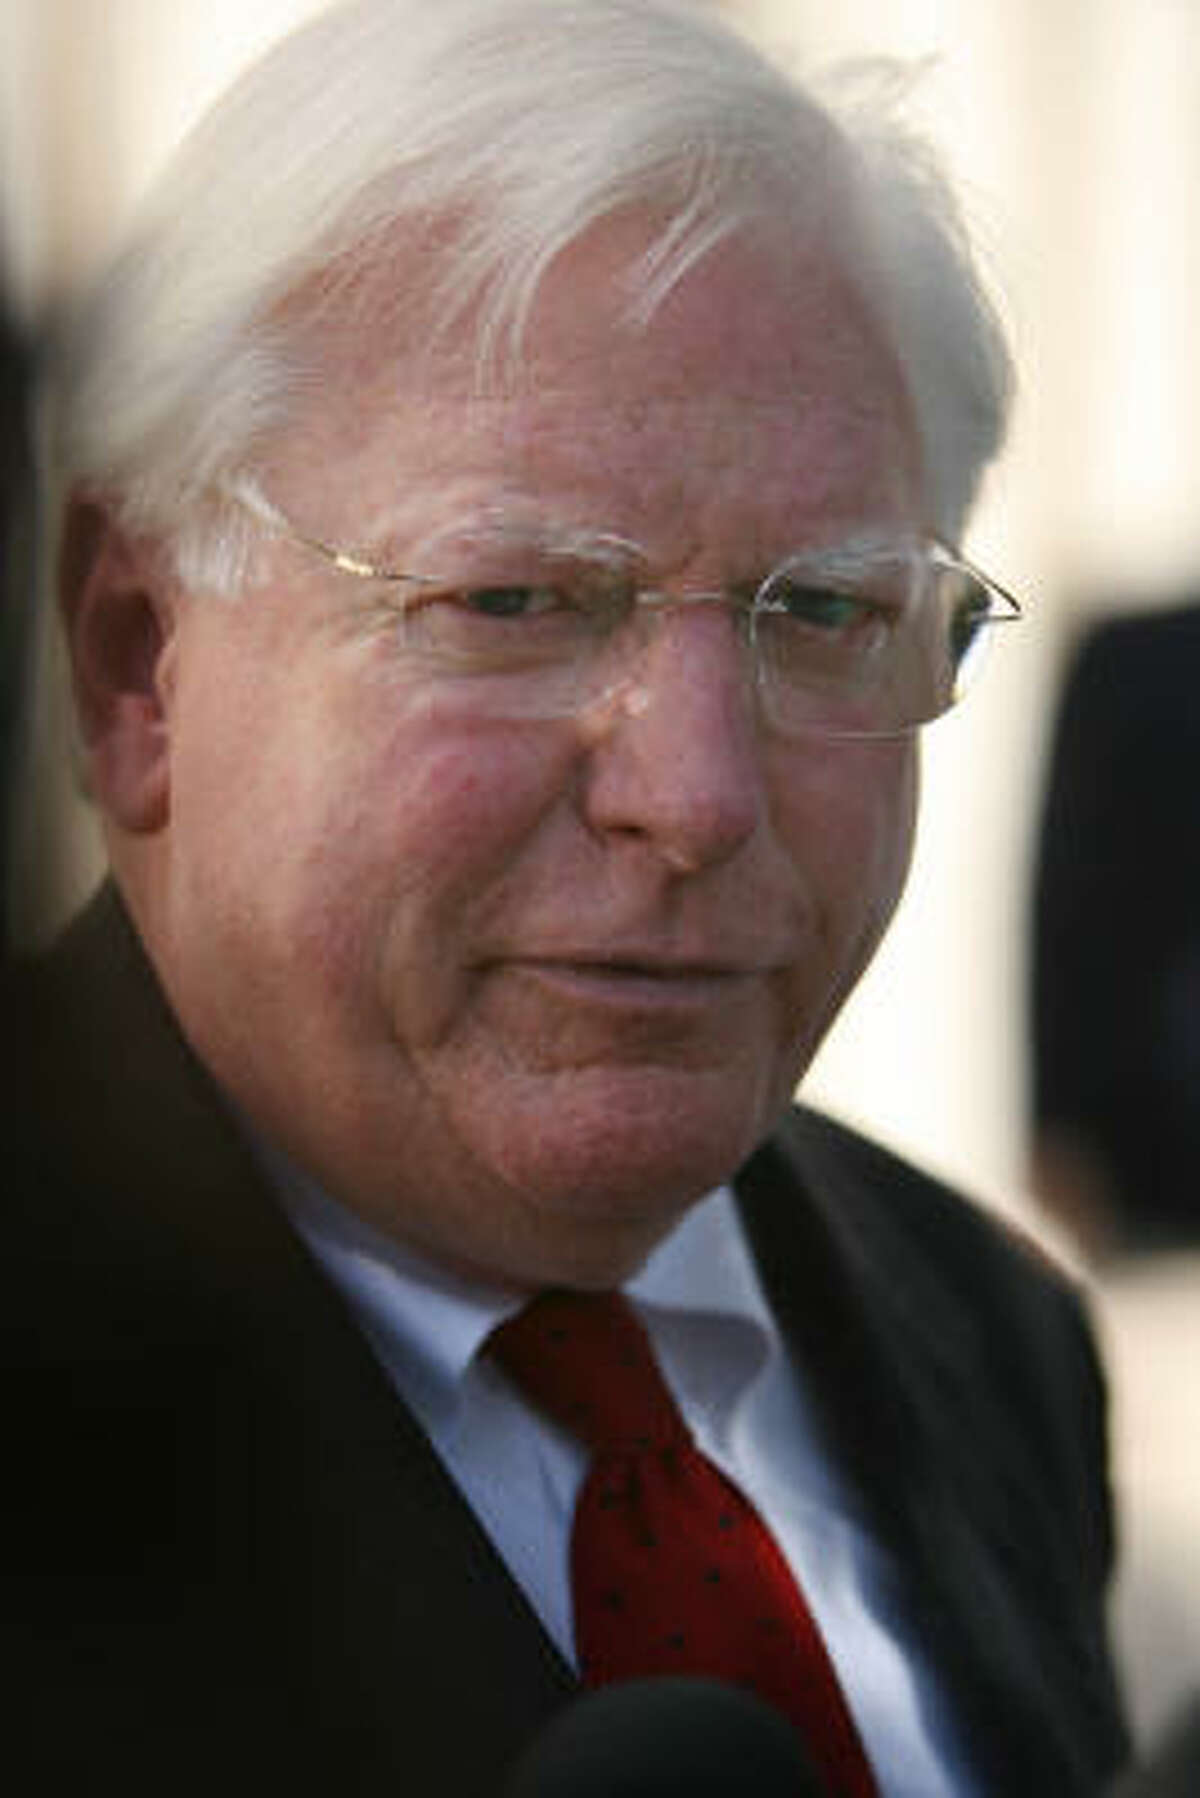 Former Texas Gov. Mark White, shown in this 2007 photo, said Tuesday he is considering whether to join the race for the mayor of Houston.